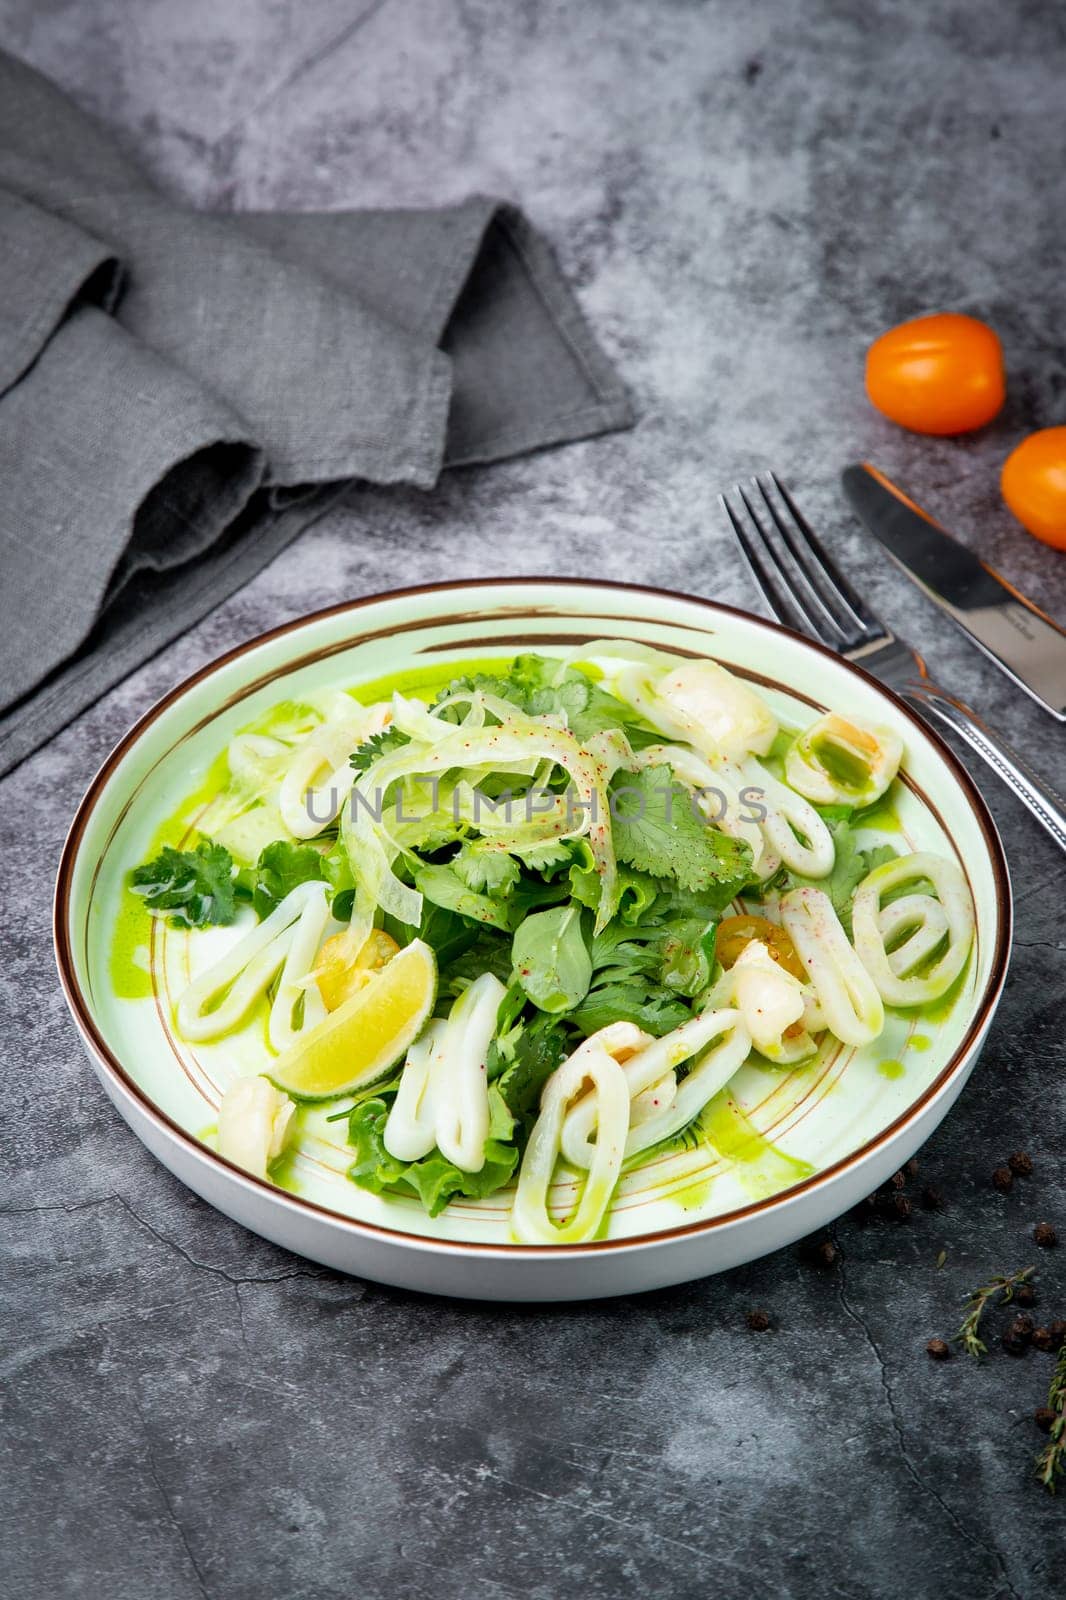 salad with arugula, parsley, lime and squid rings, side view by tewolf